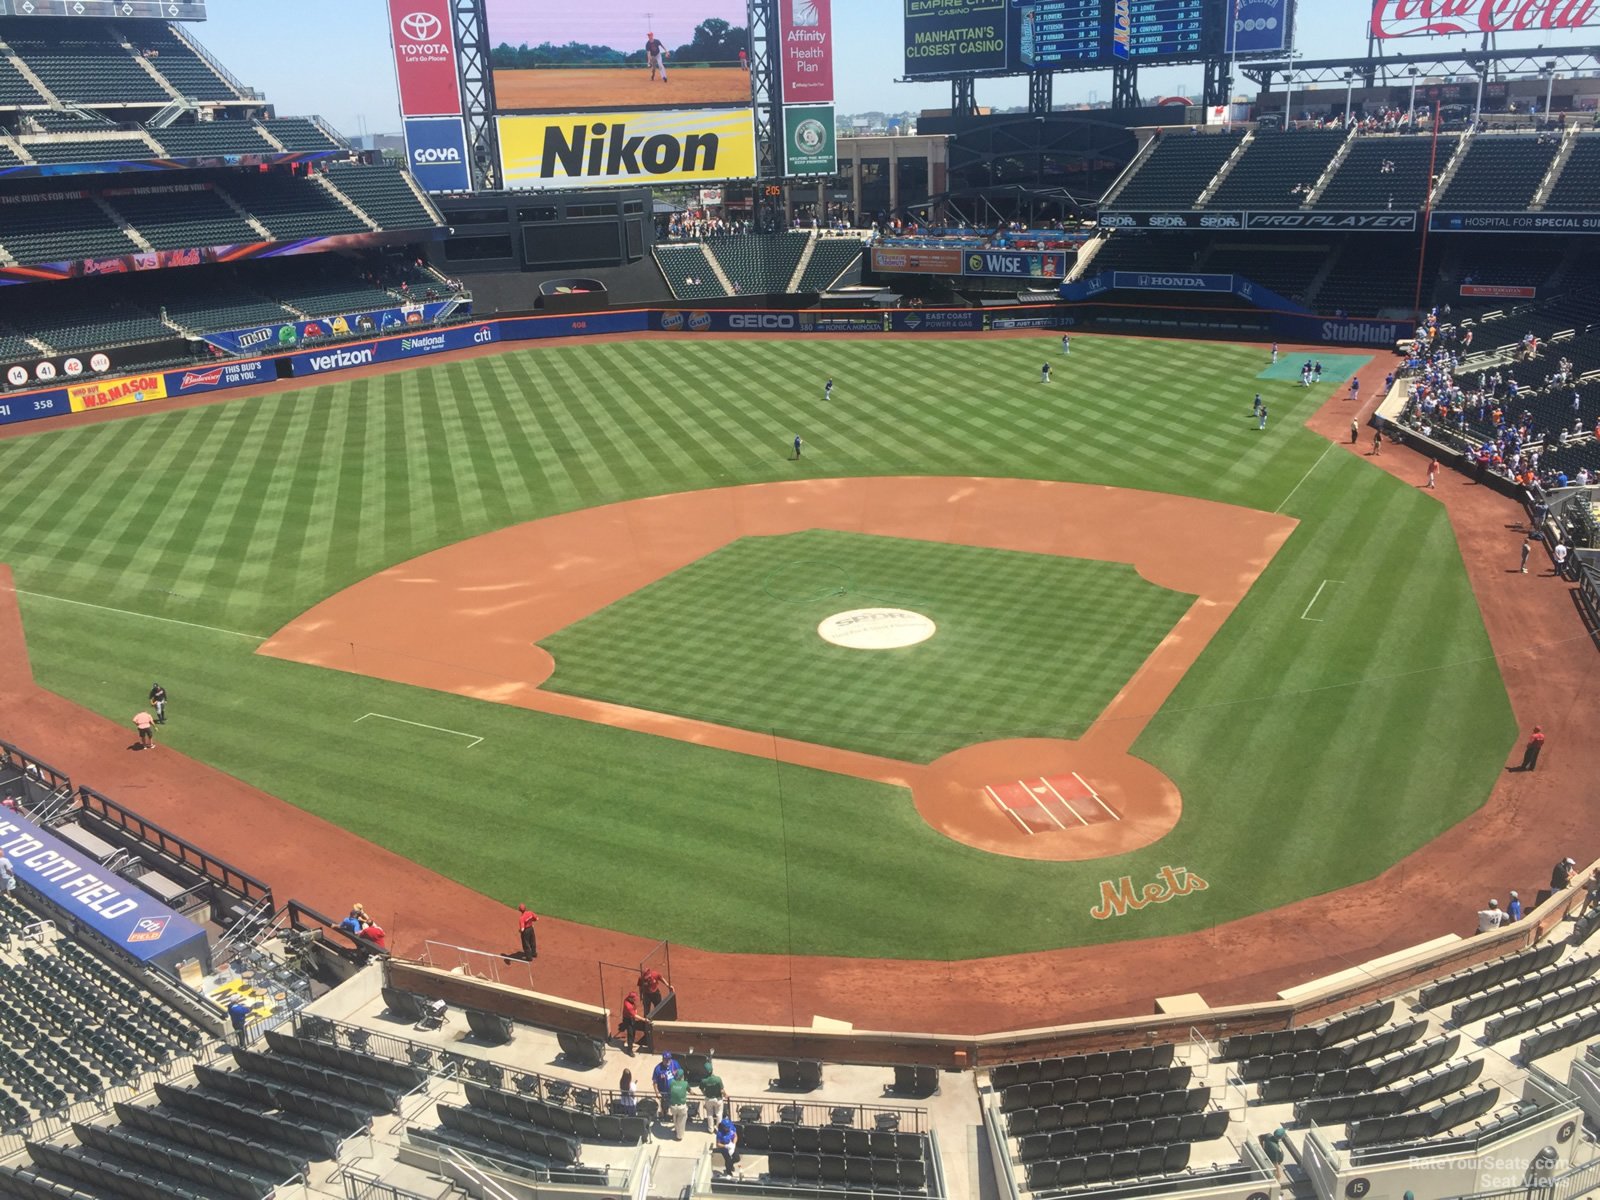 section 417, row 1 seat view  - citi field